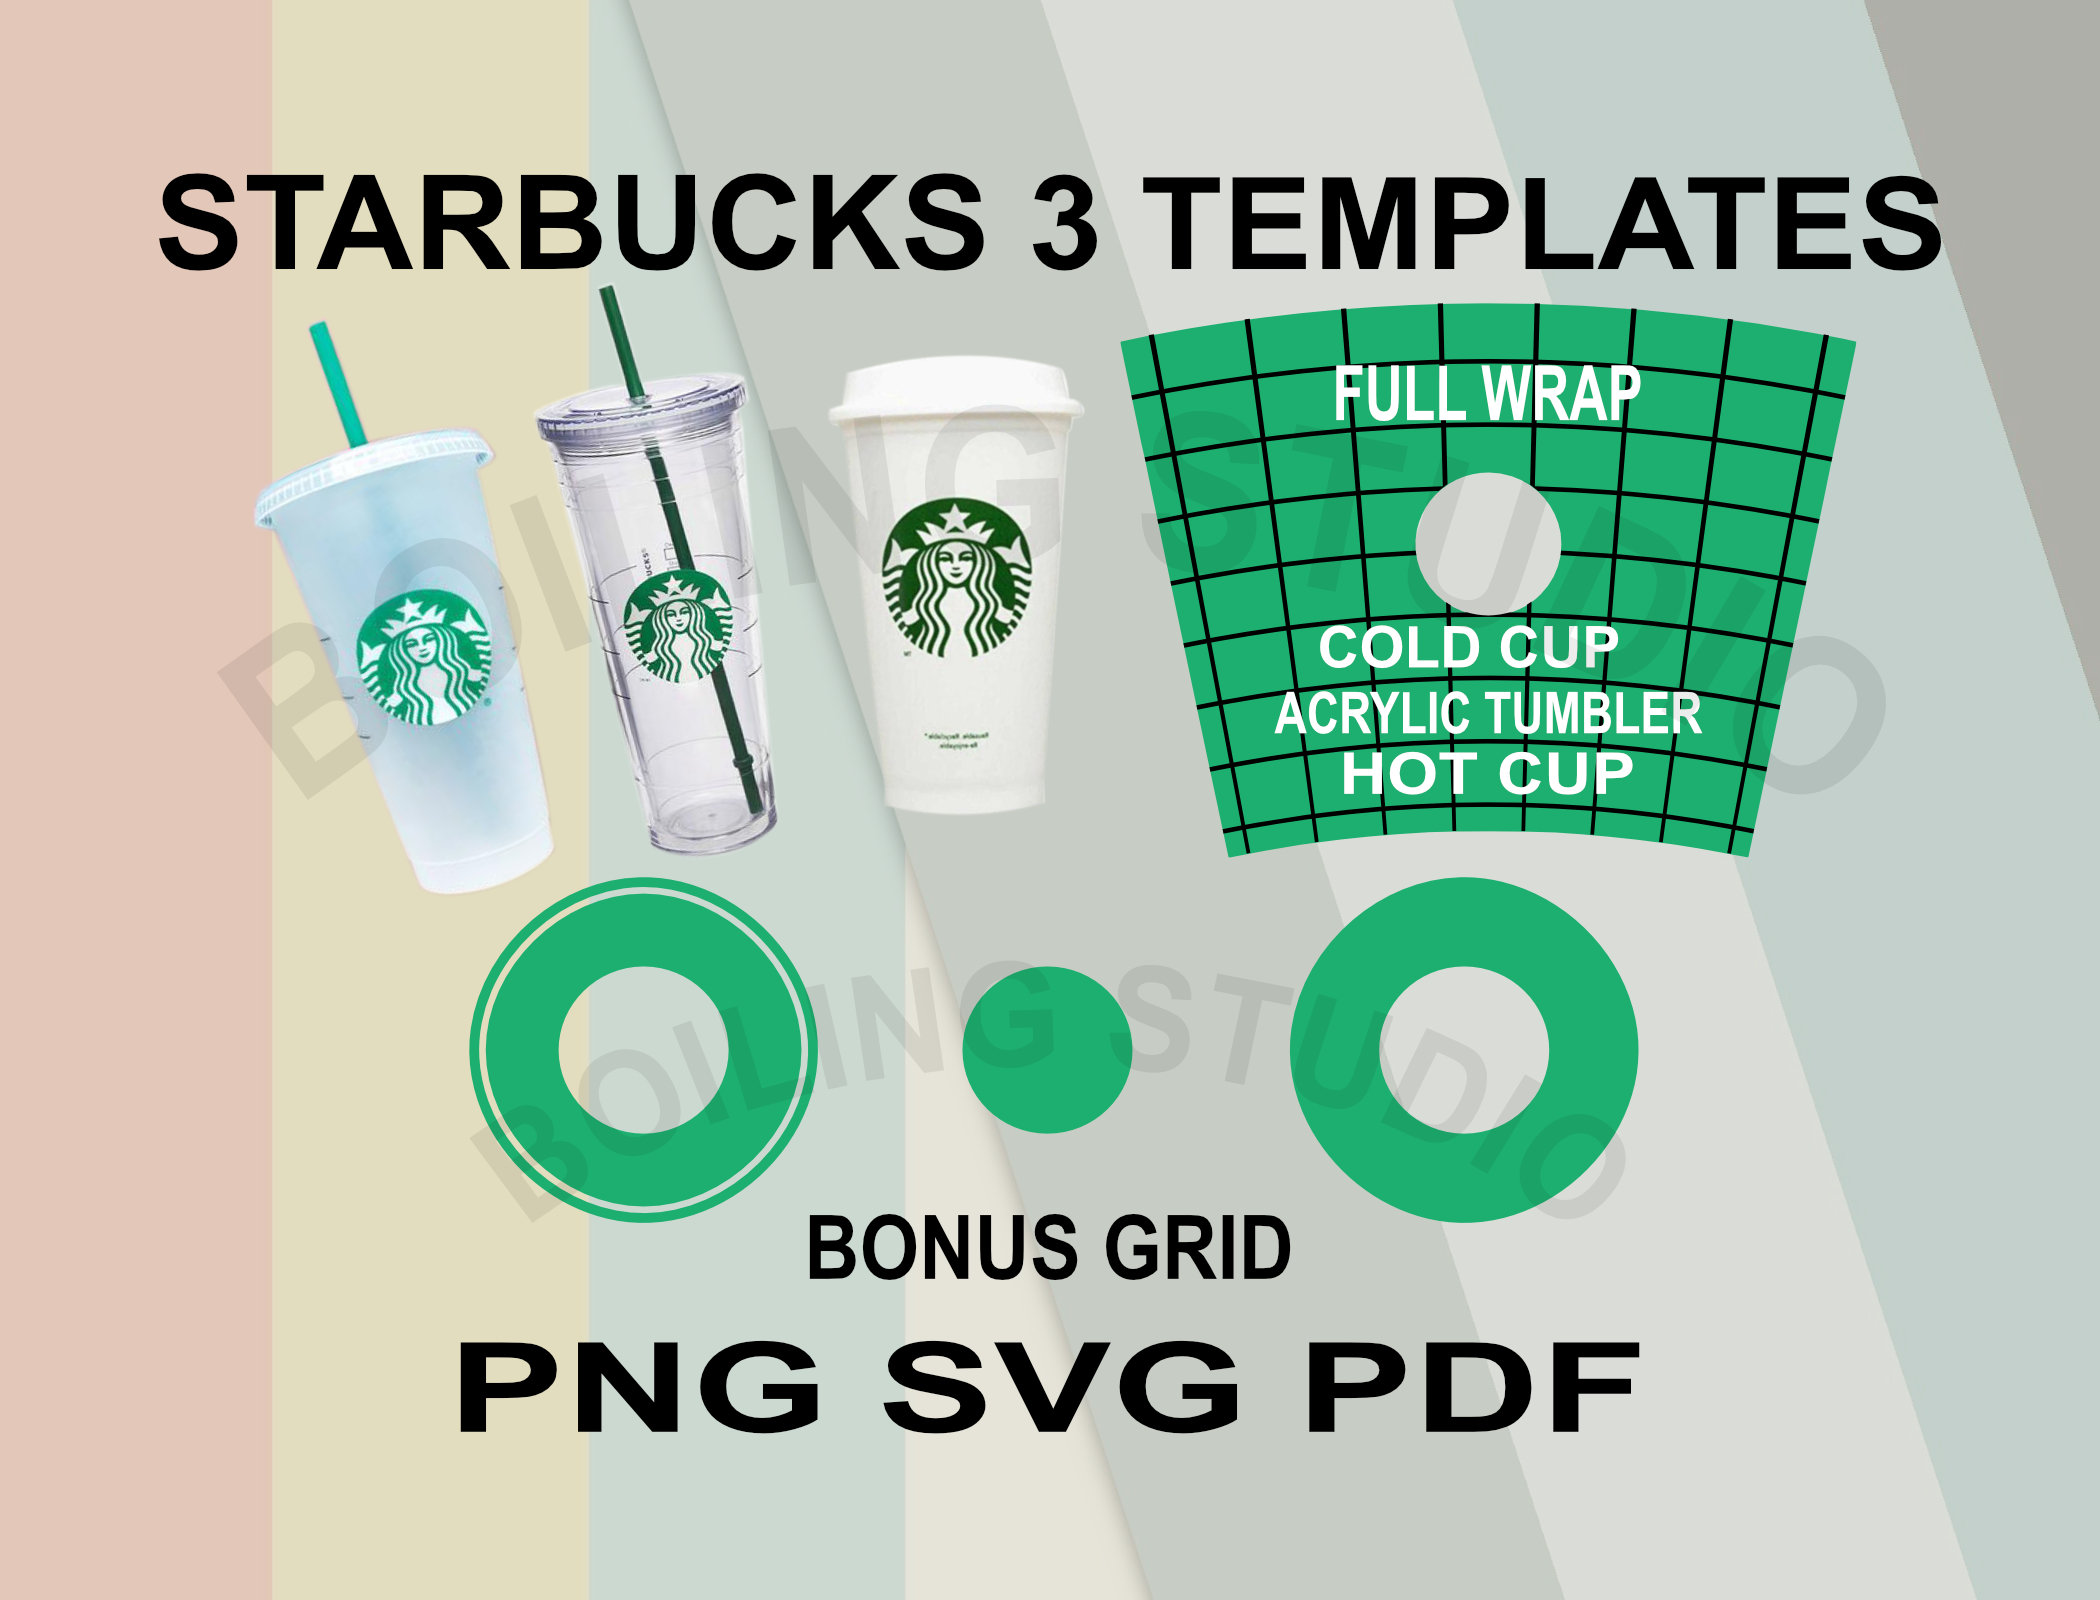 How to Design a Wrap Template for ANY Tumbler or Cup (Starbucks too!) 